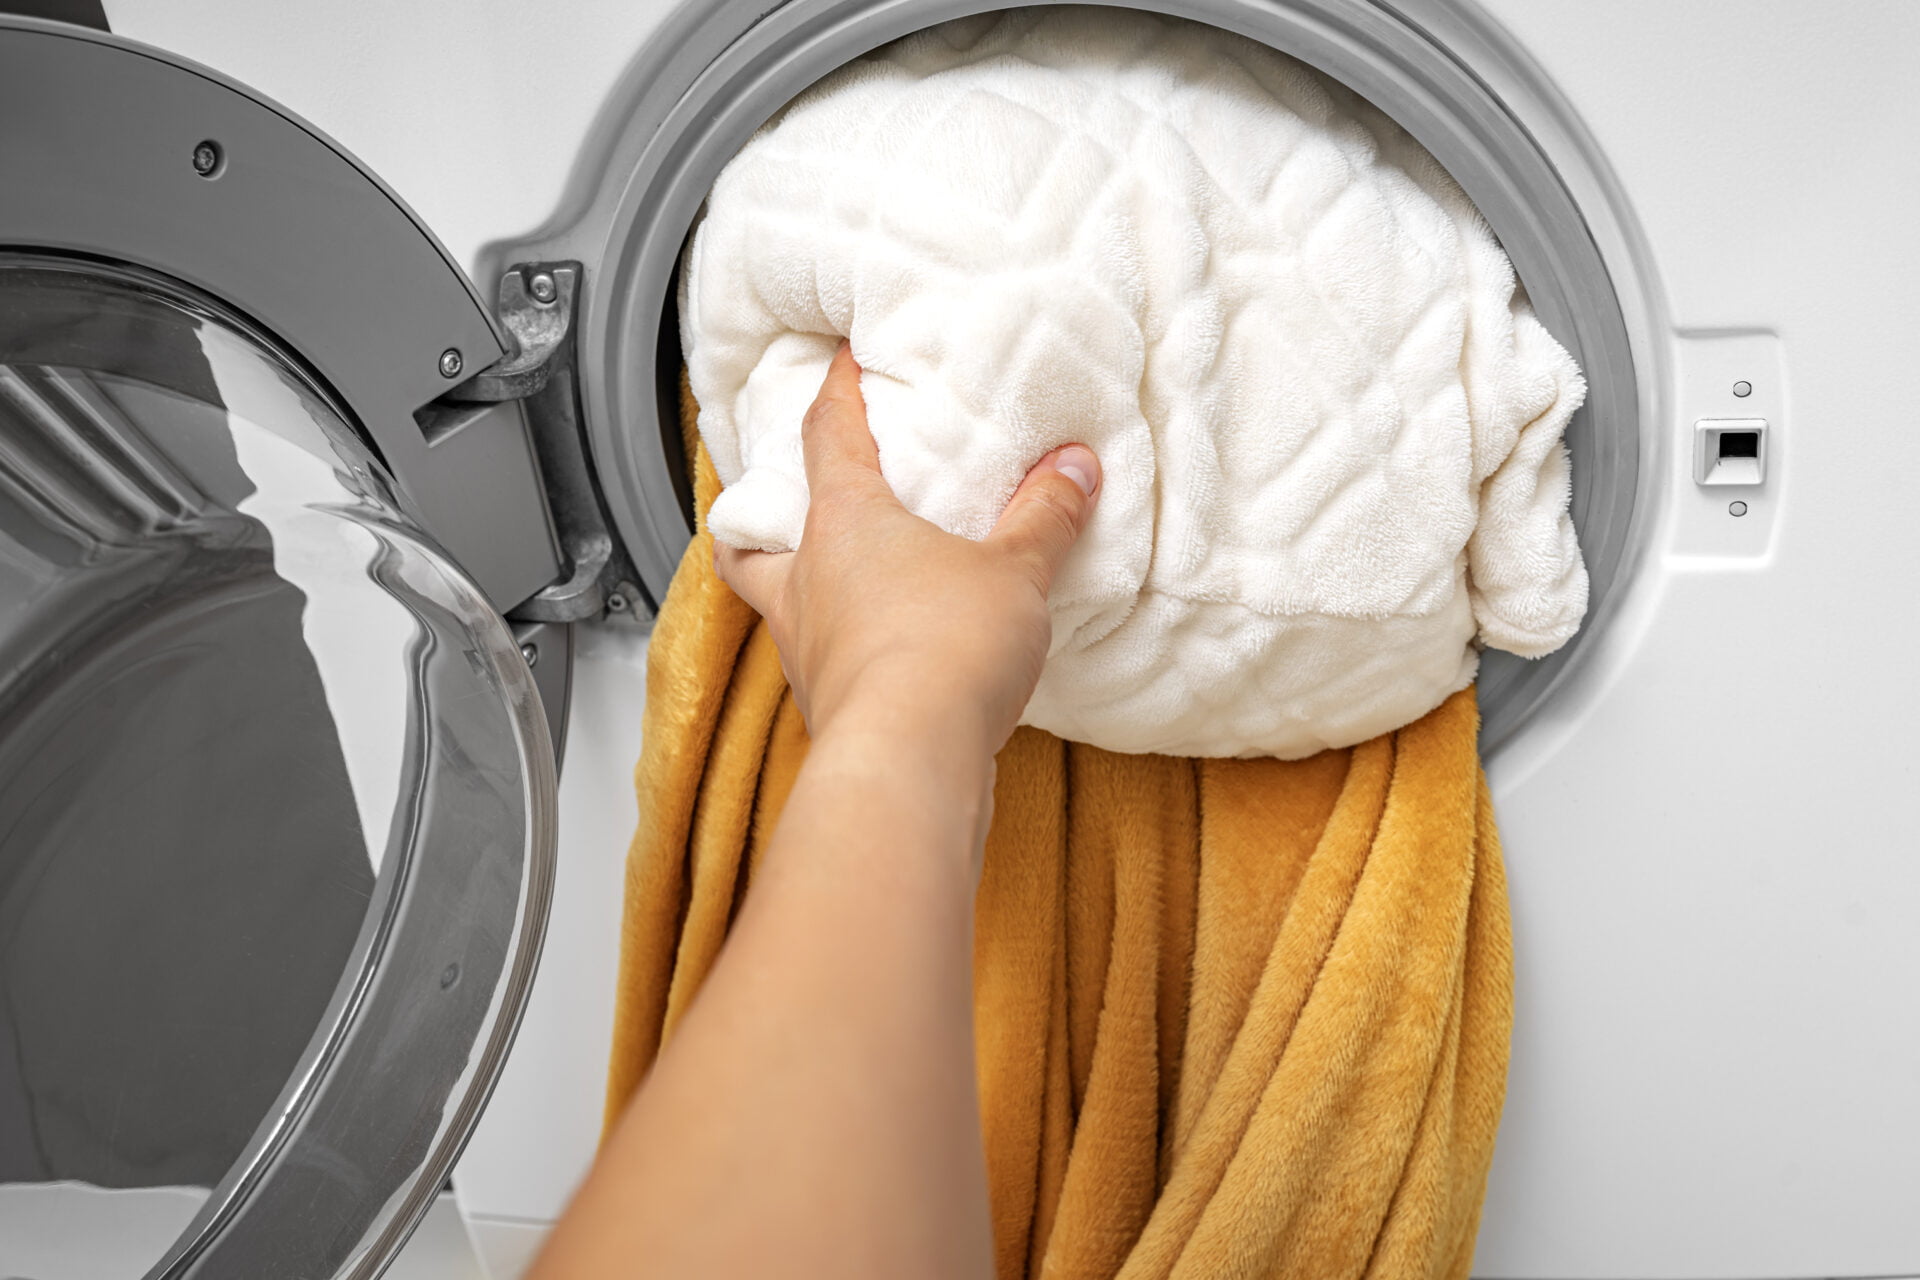 A hand pushes a pillow into the washing machine. Washing large items.